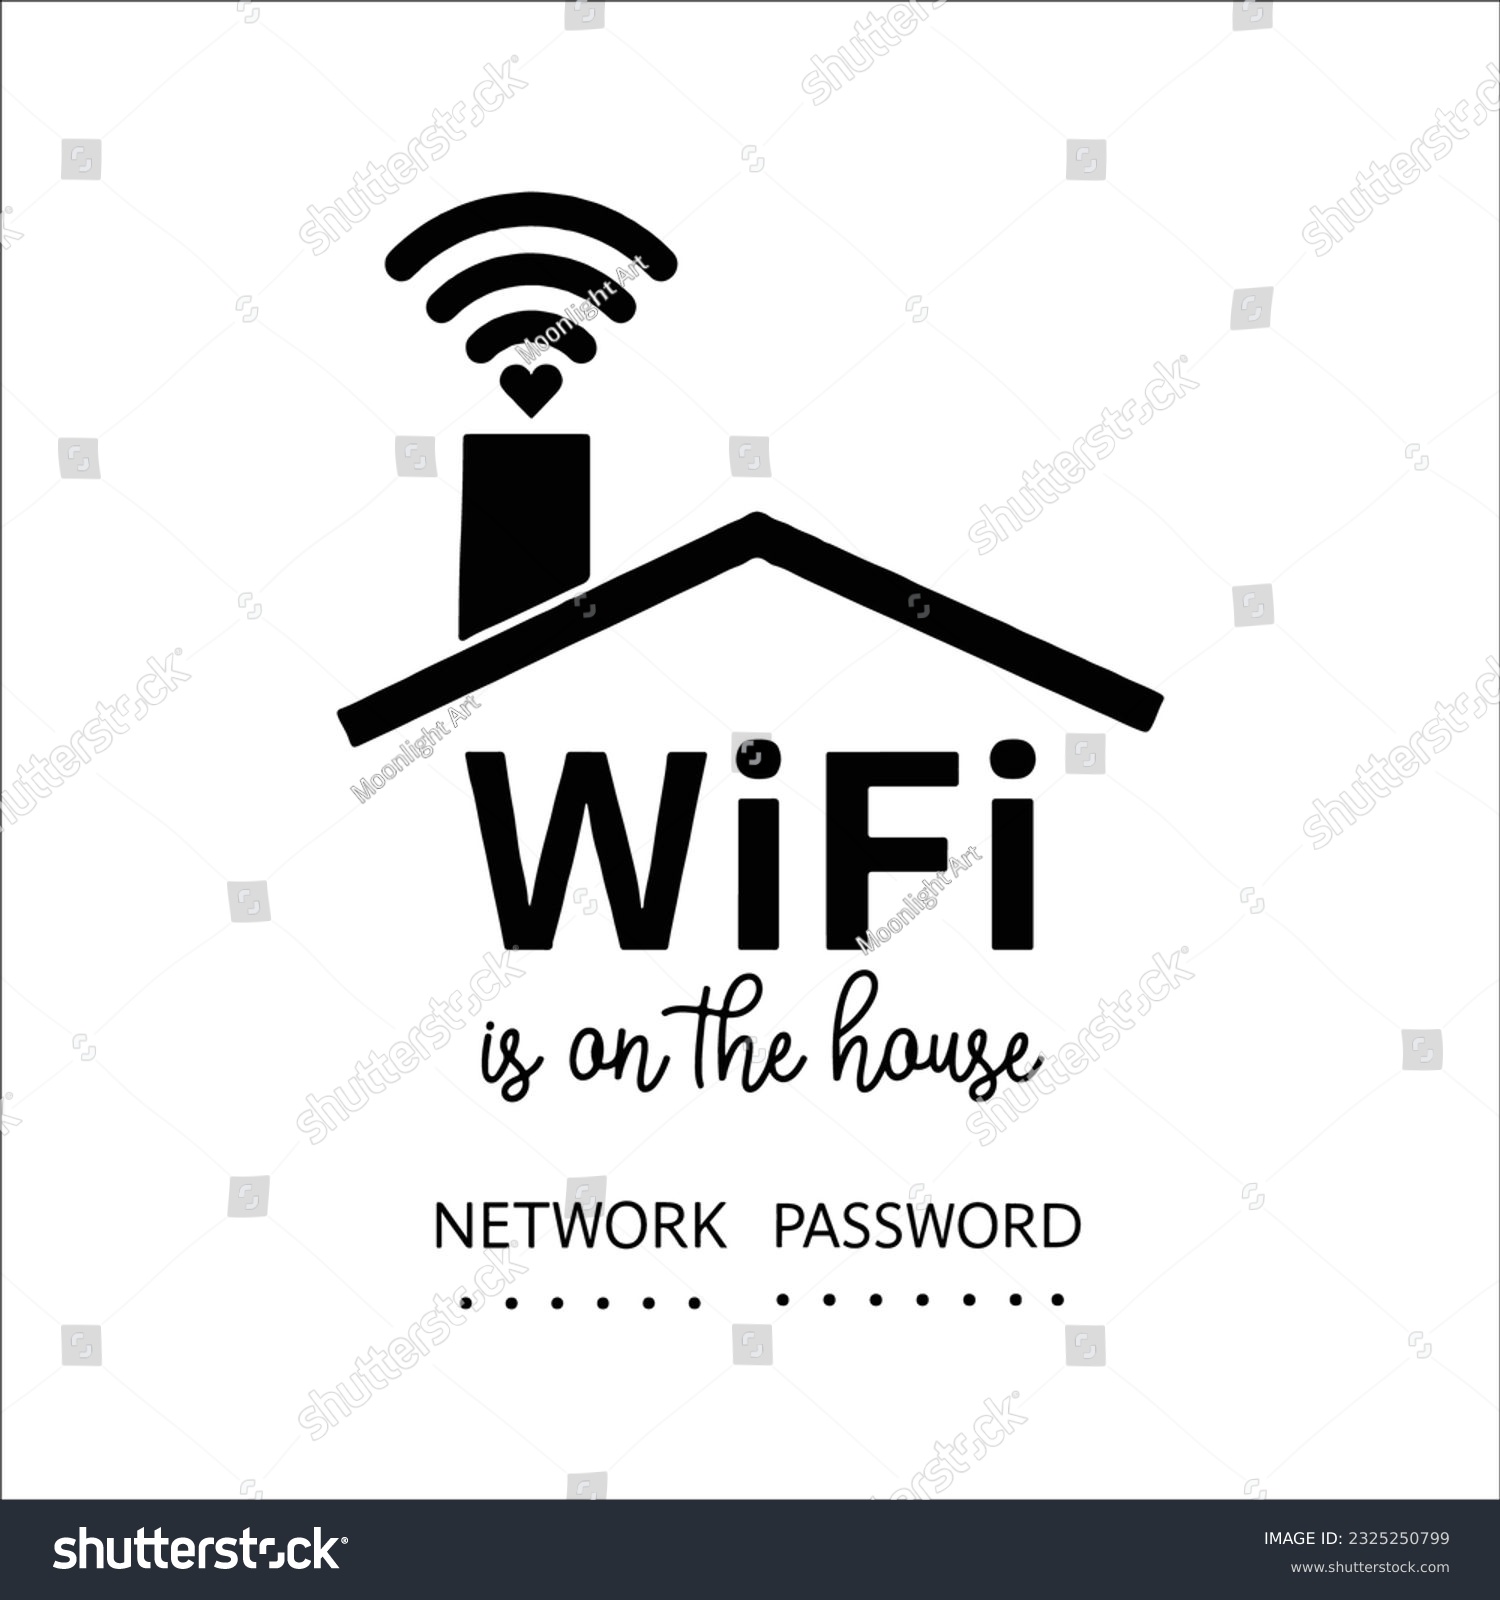 SVG of WiFi Password Sign Svg, Guest Room Sign, Home Sign Svg, Editable WiFi, Svg Files for Cricut, Home Svg, Wifi in on the House, Internet Sign svg